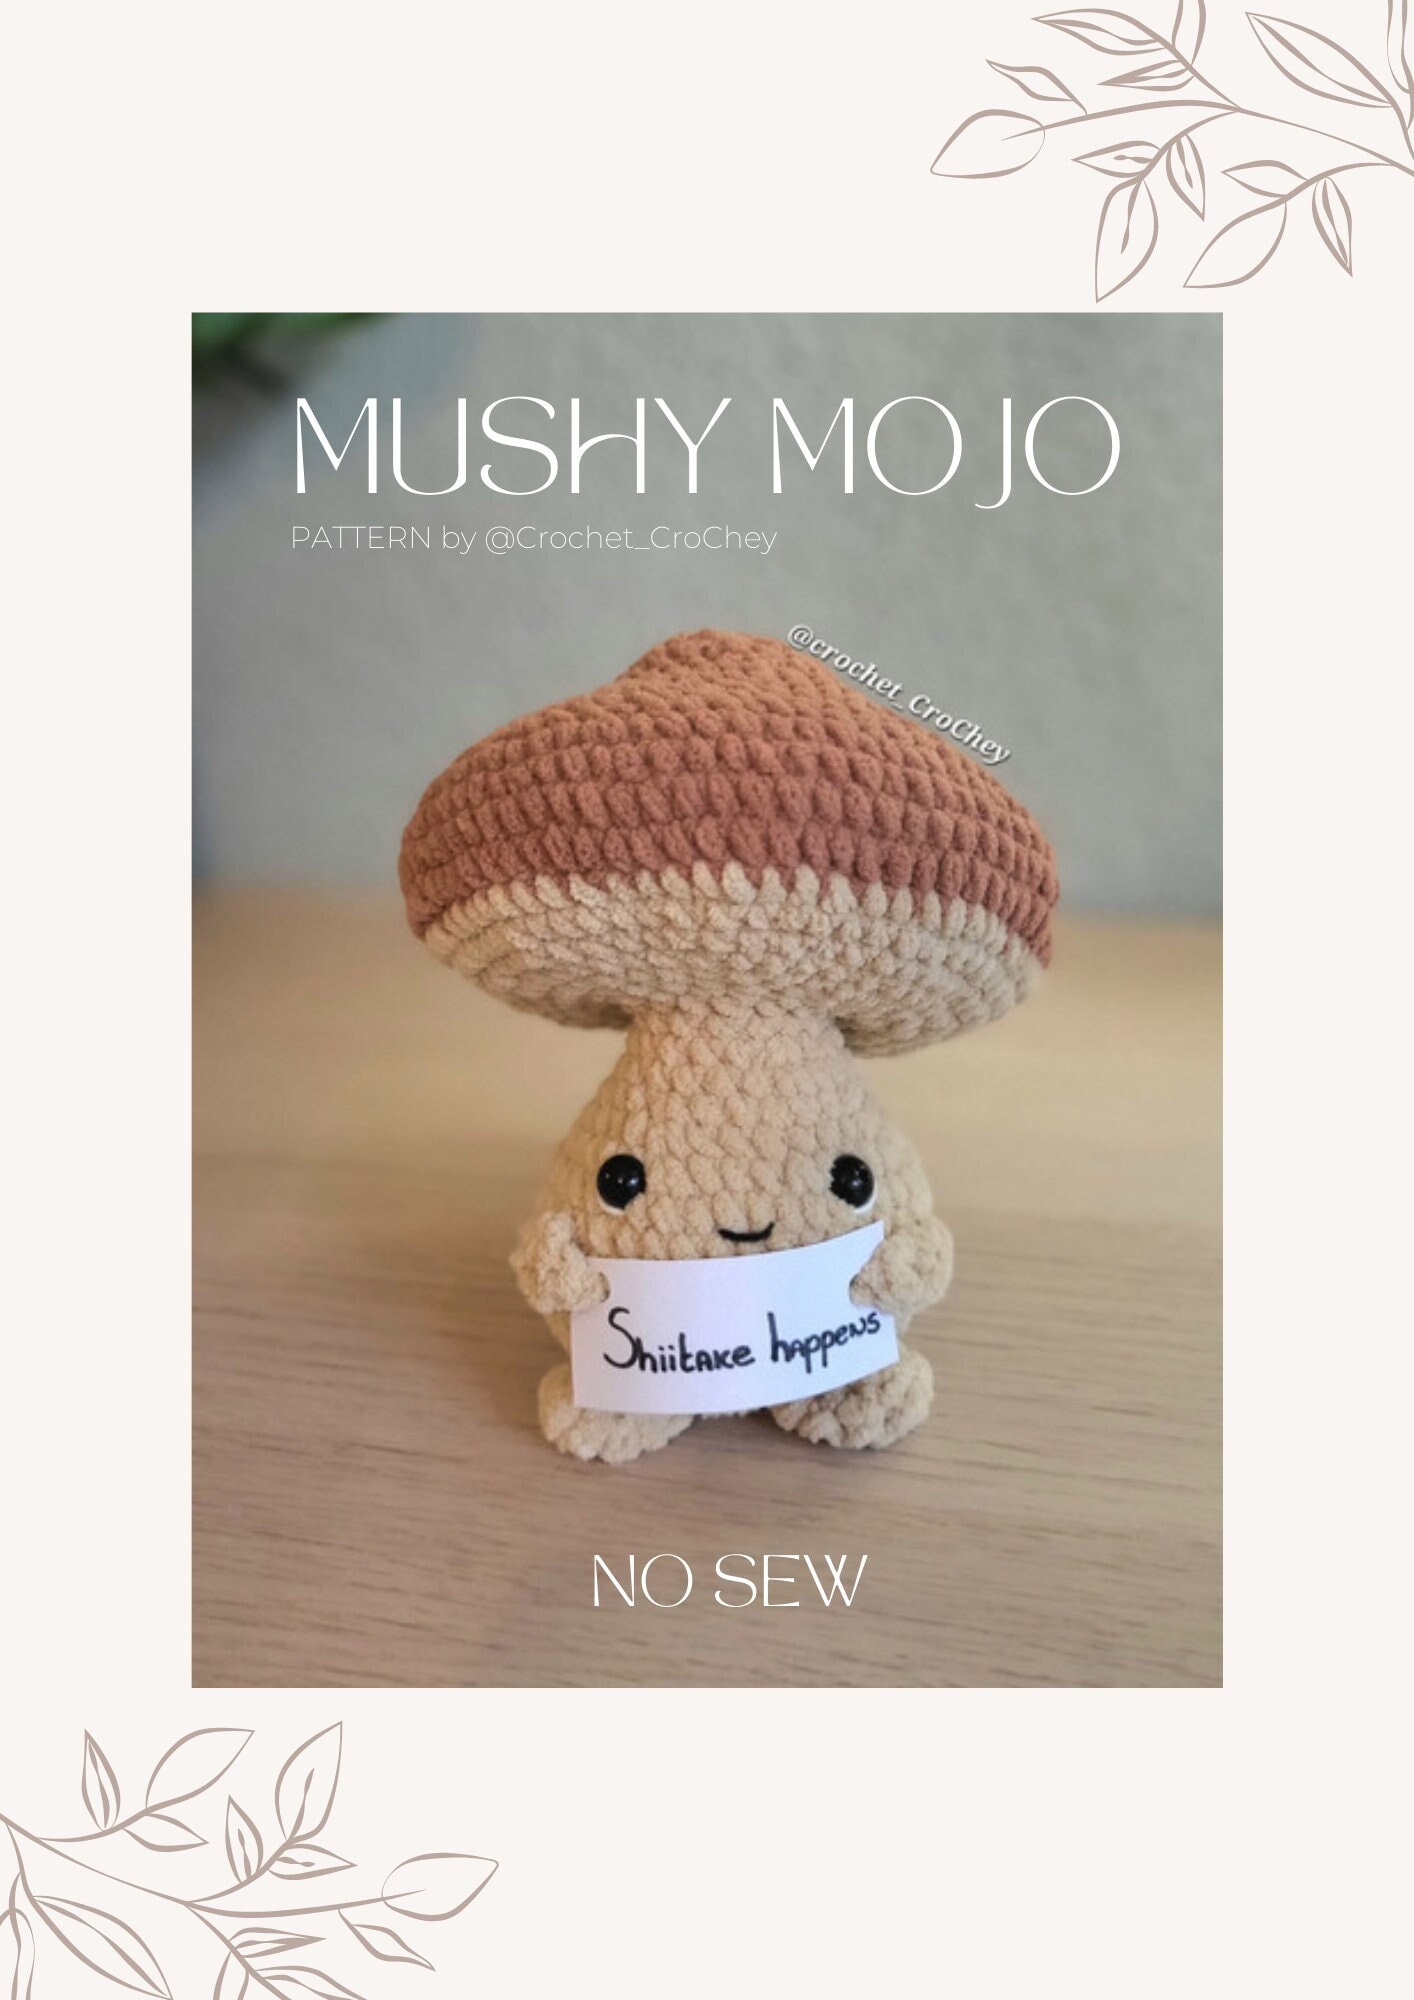 Mushy Mojo, Emotional Support Mushroom, LOW-SEW PATTERN, with optional  Frills as brows & arms to hold a message, completely customizable